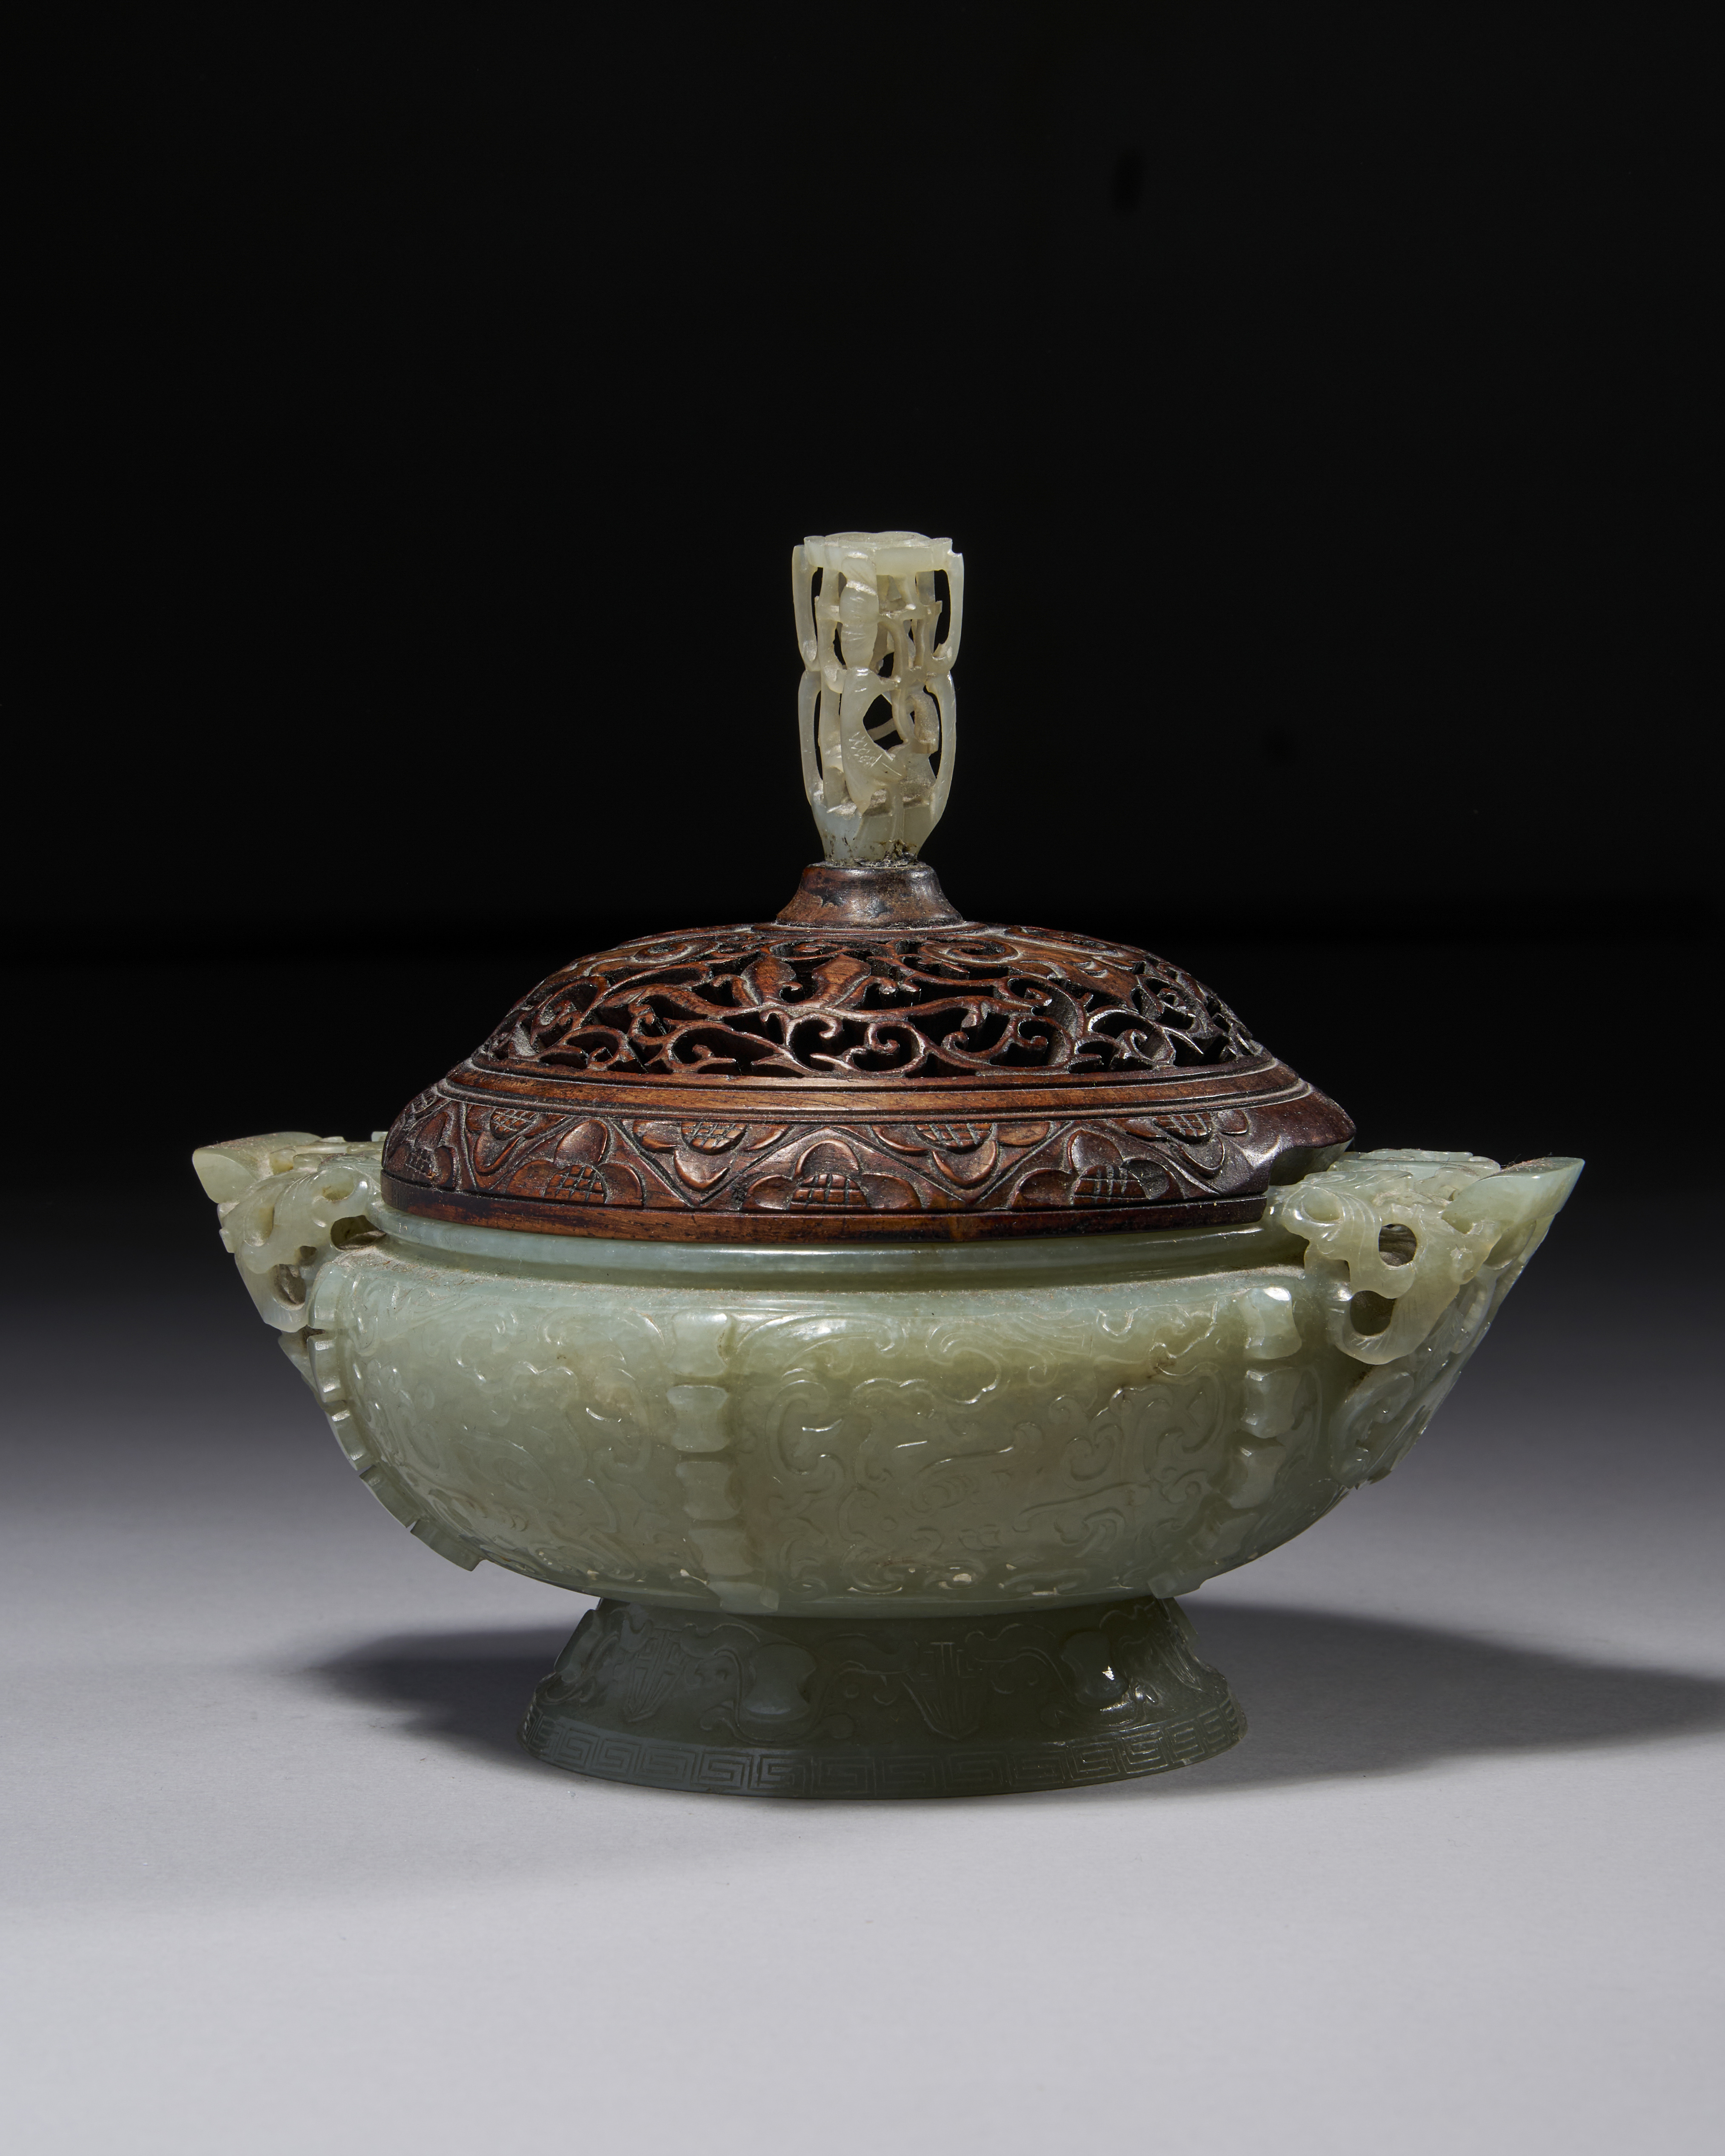 A CHINESE CARVED PALE GREENISH-WHITE JADE ARCHAISTIC CENSER AND COVER, QIANLONG PERIOD (1736-1795)